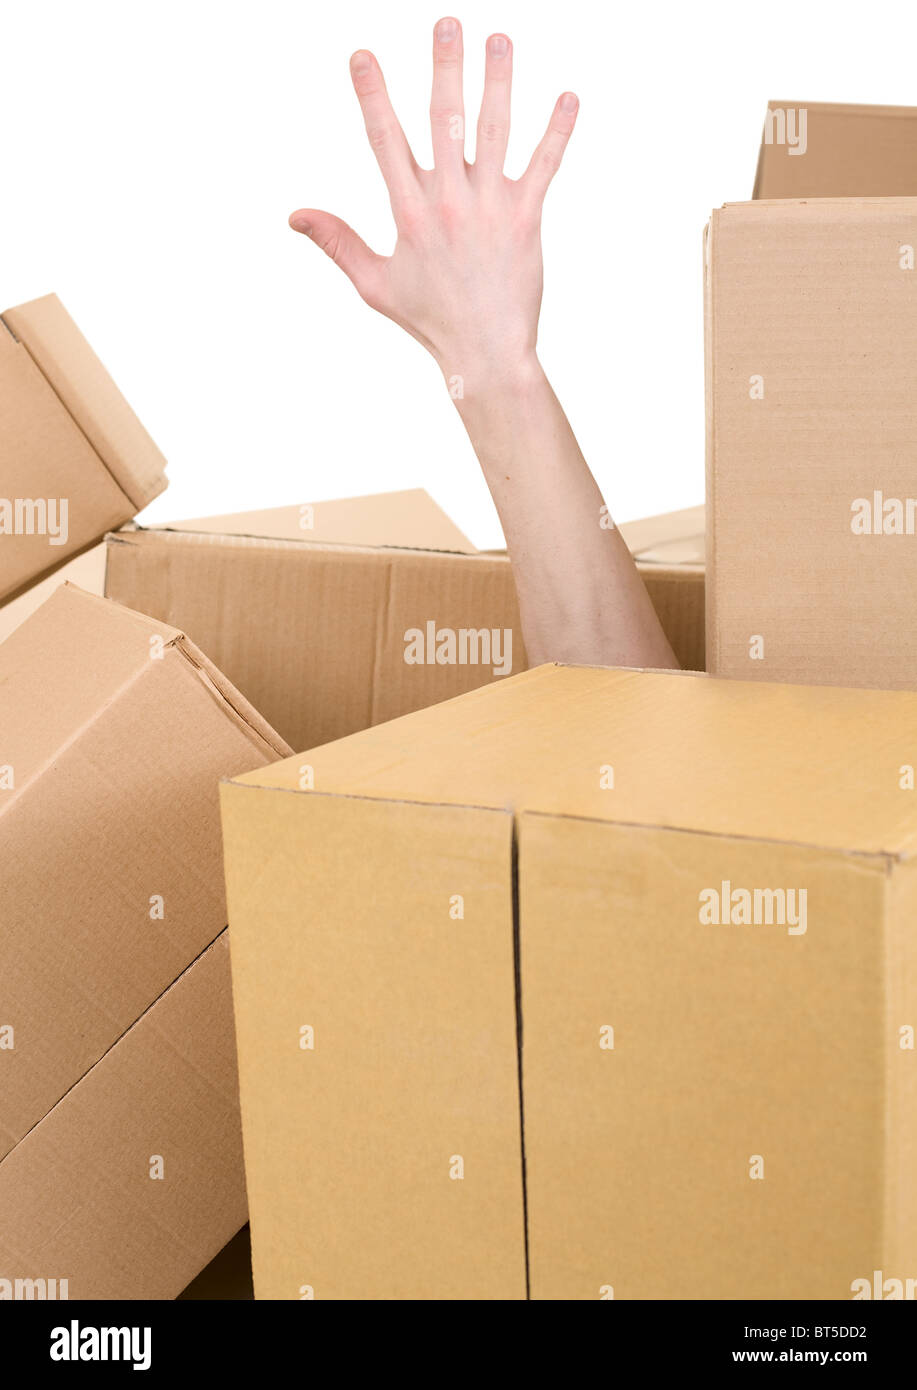 Male hand protruding from pile carton box Stock Photo